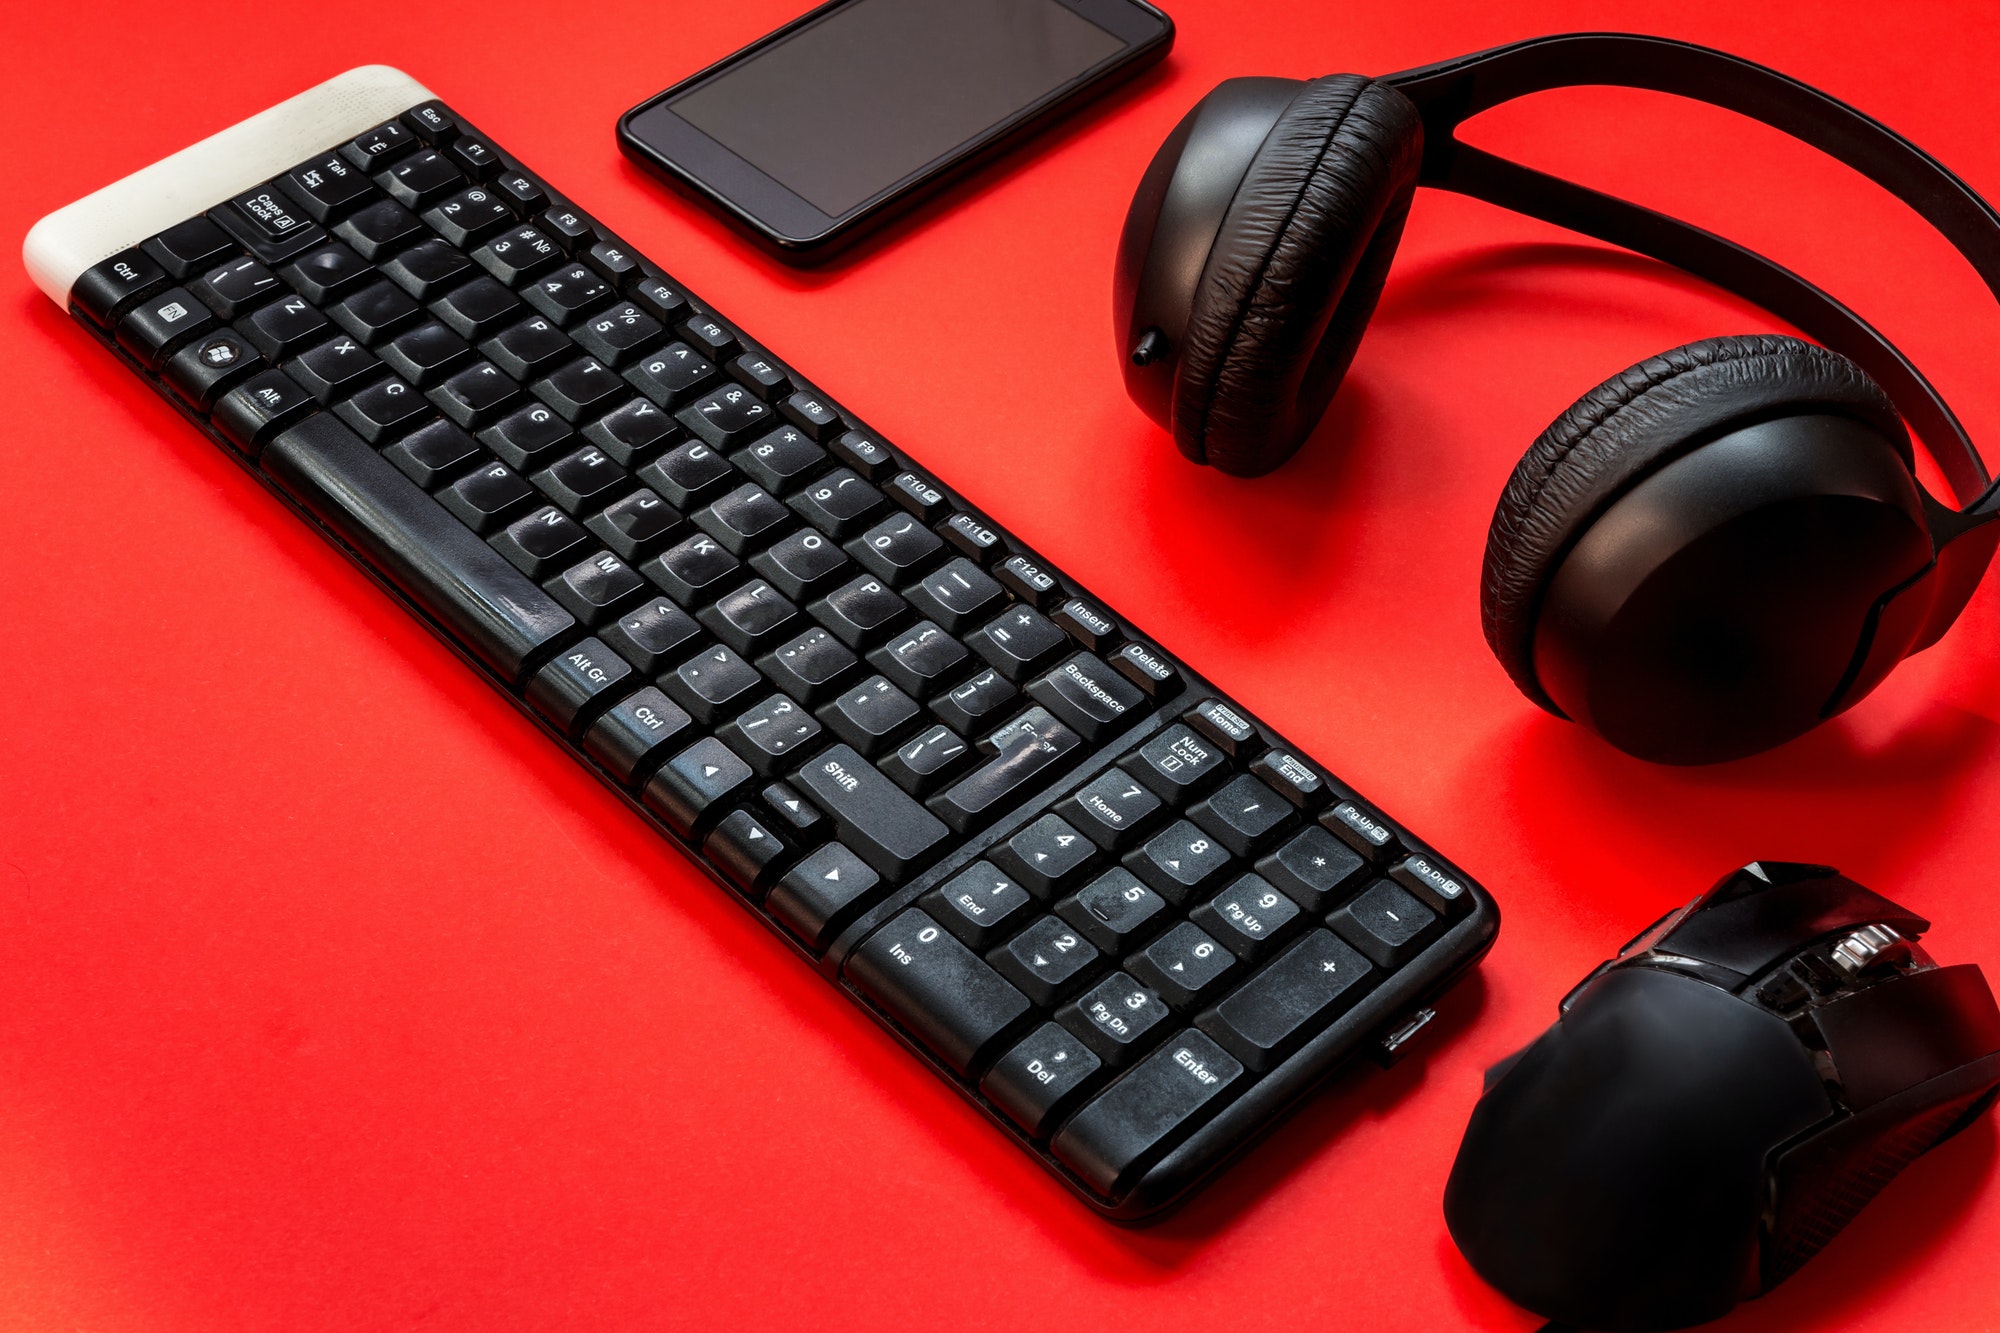 Game keyboard, headphones, mouse accessories for a gamer on a red background. flat lay top view with